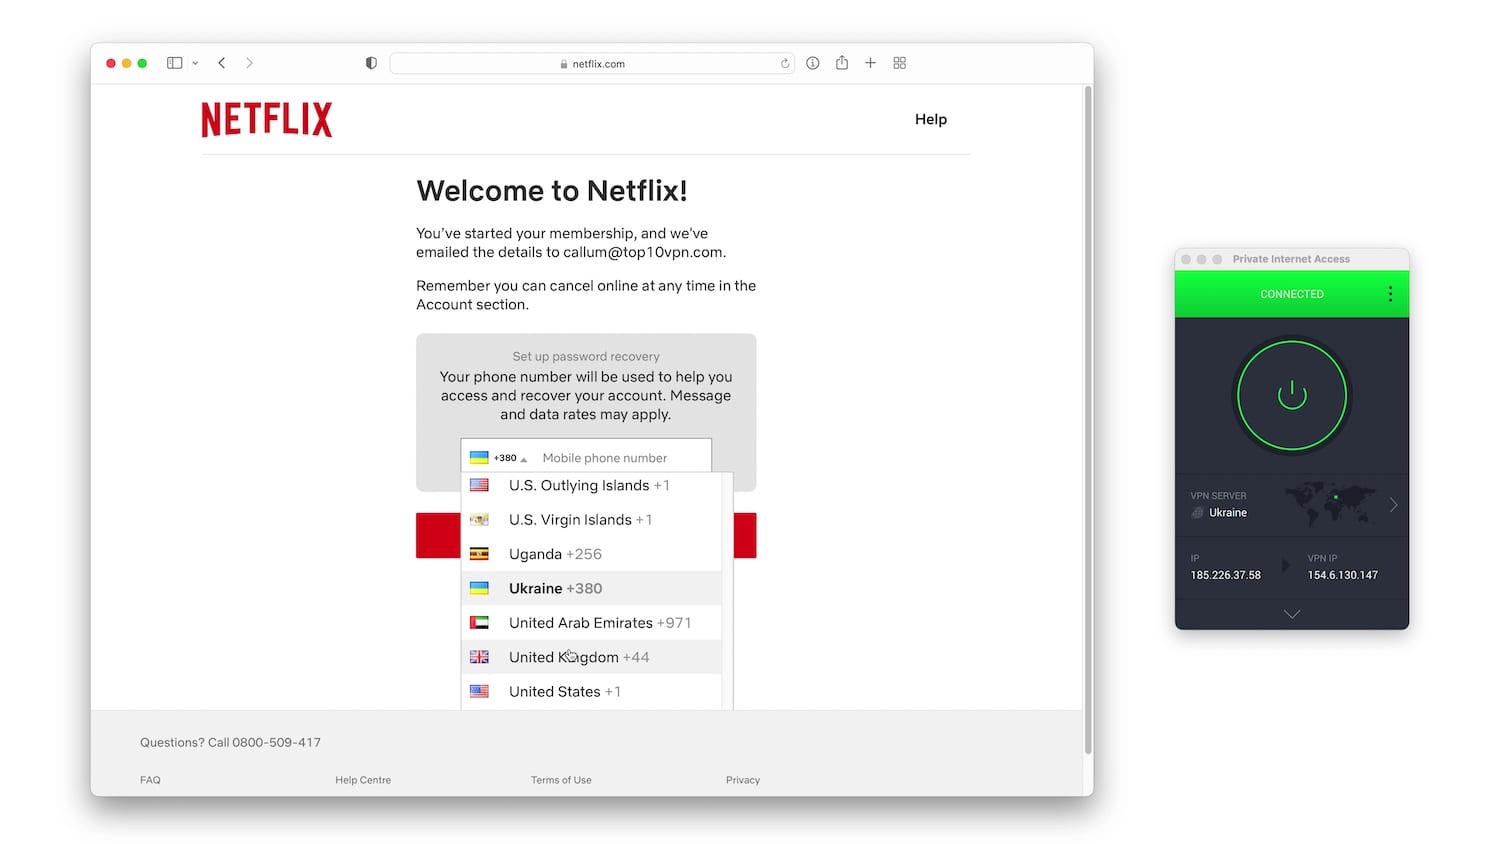 The successful Netflix signup screen, including a dropdown of dialing codes for the cell phone associated with the account